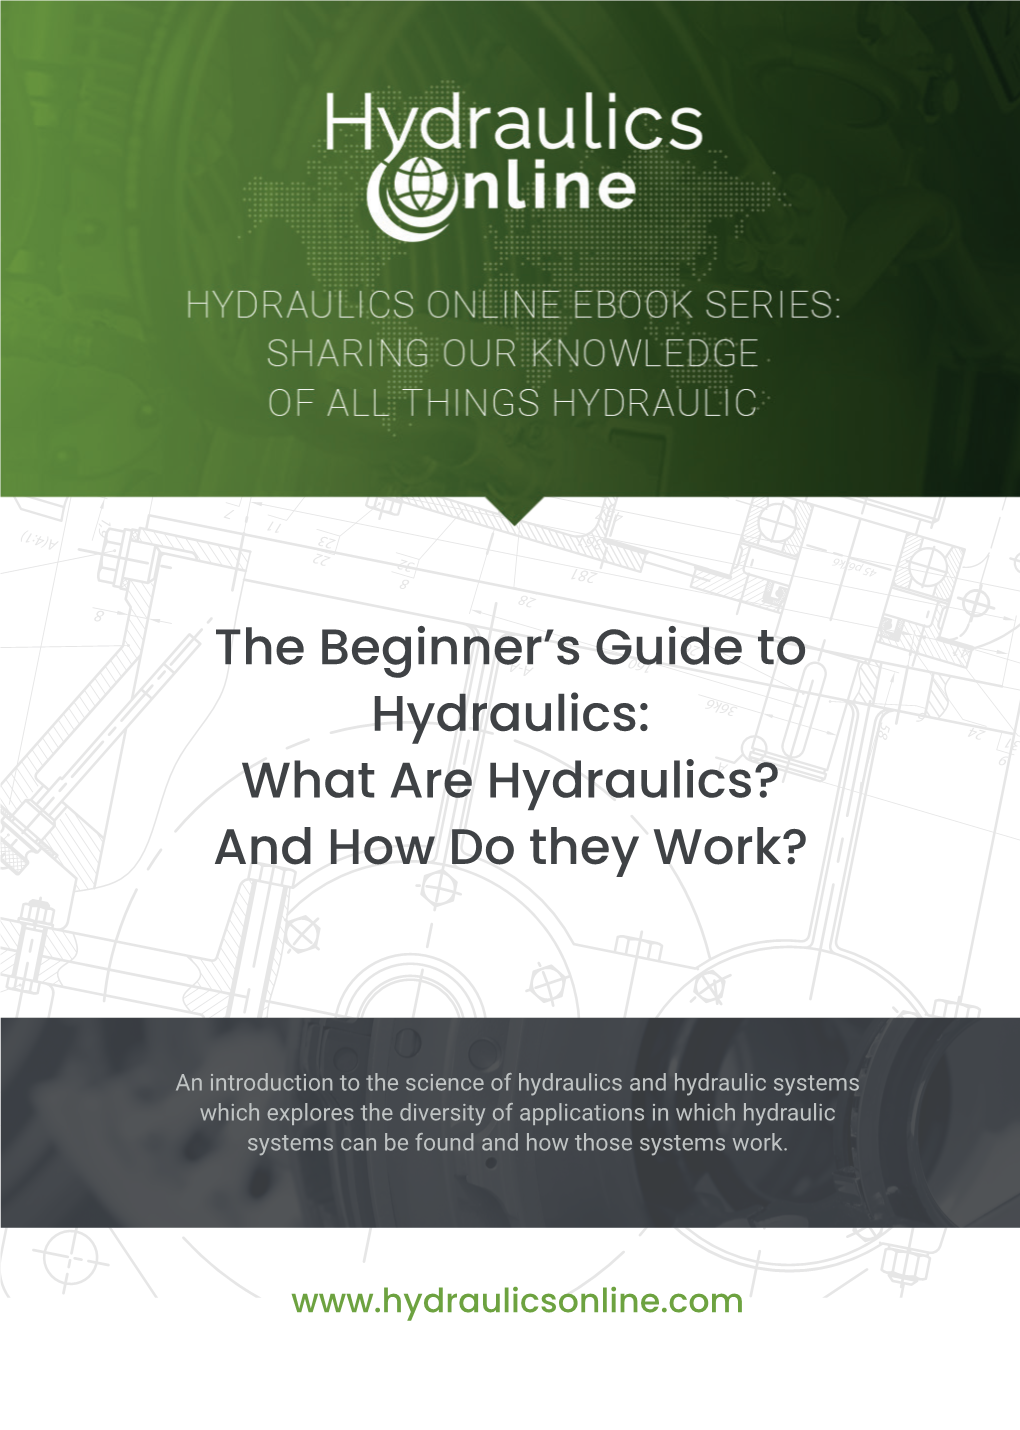 The Beginner's Guide to Hydraulics